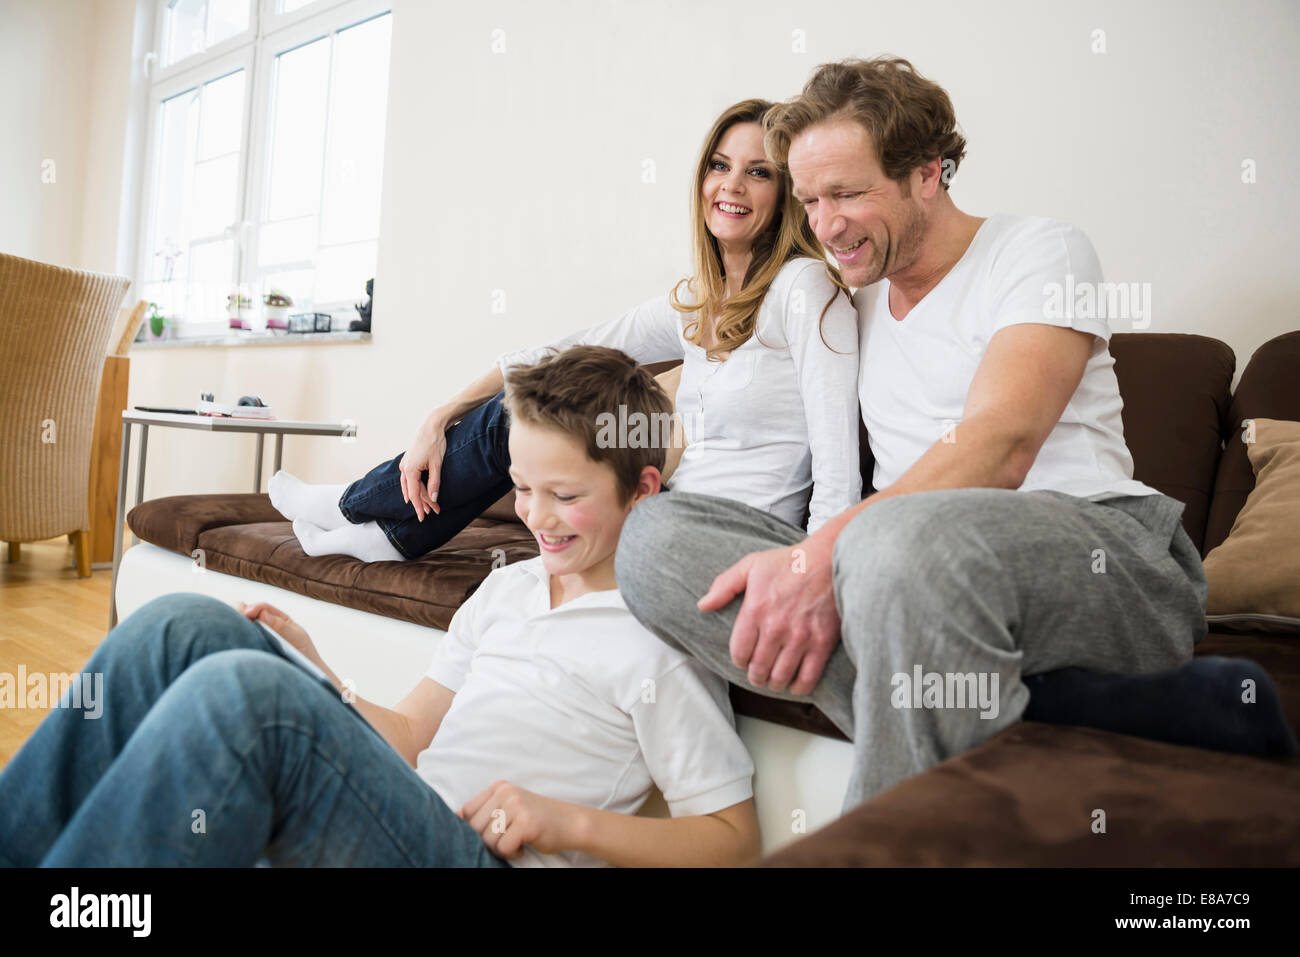 Happy Family in living room with digital tablet Banque D'Images